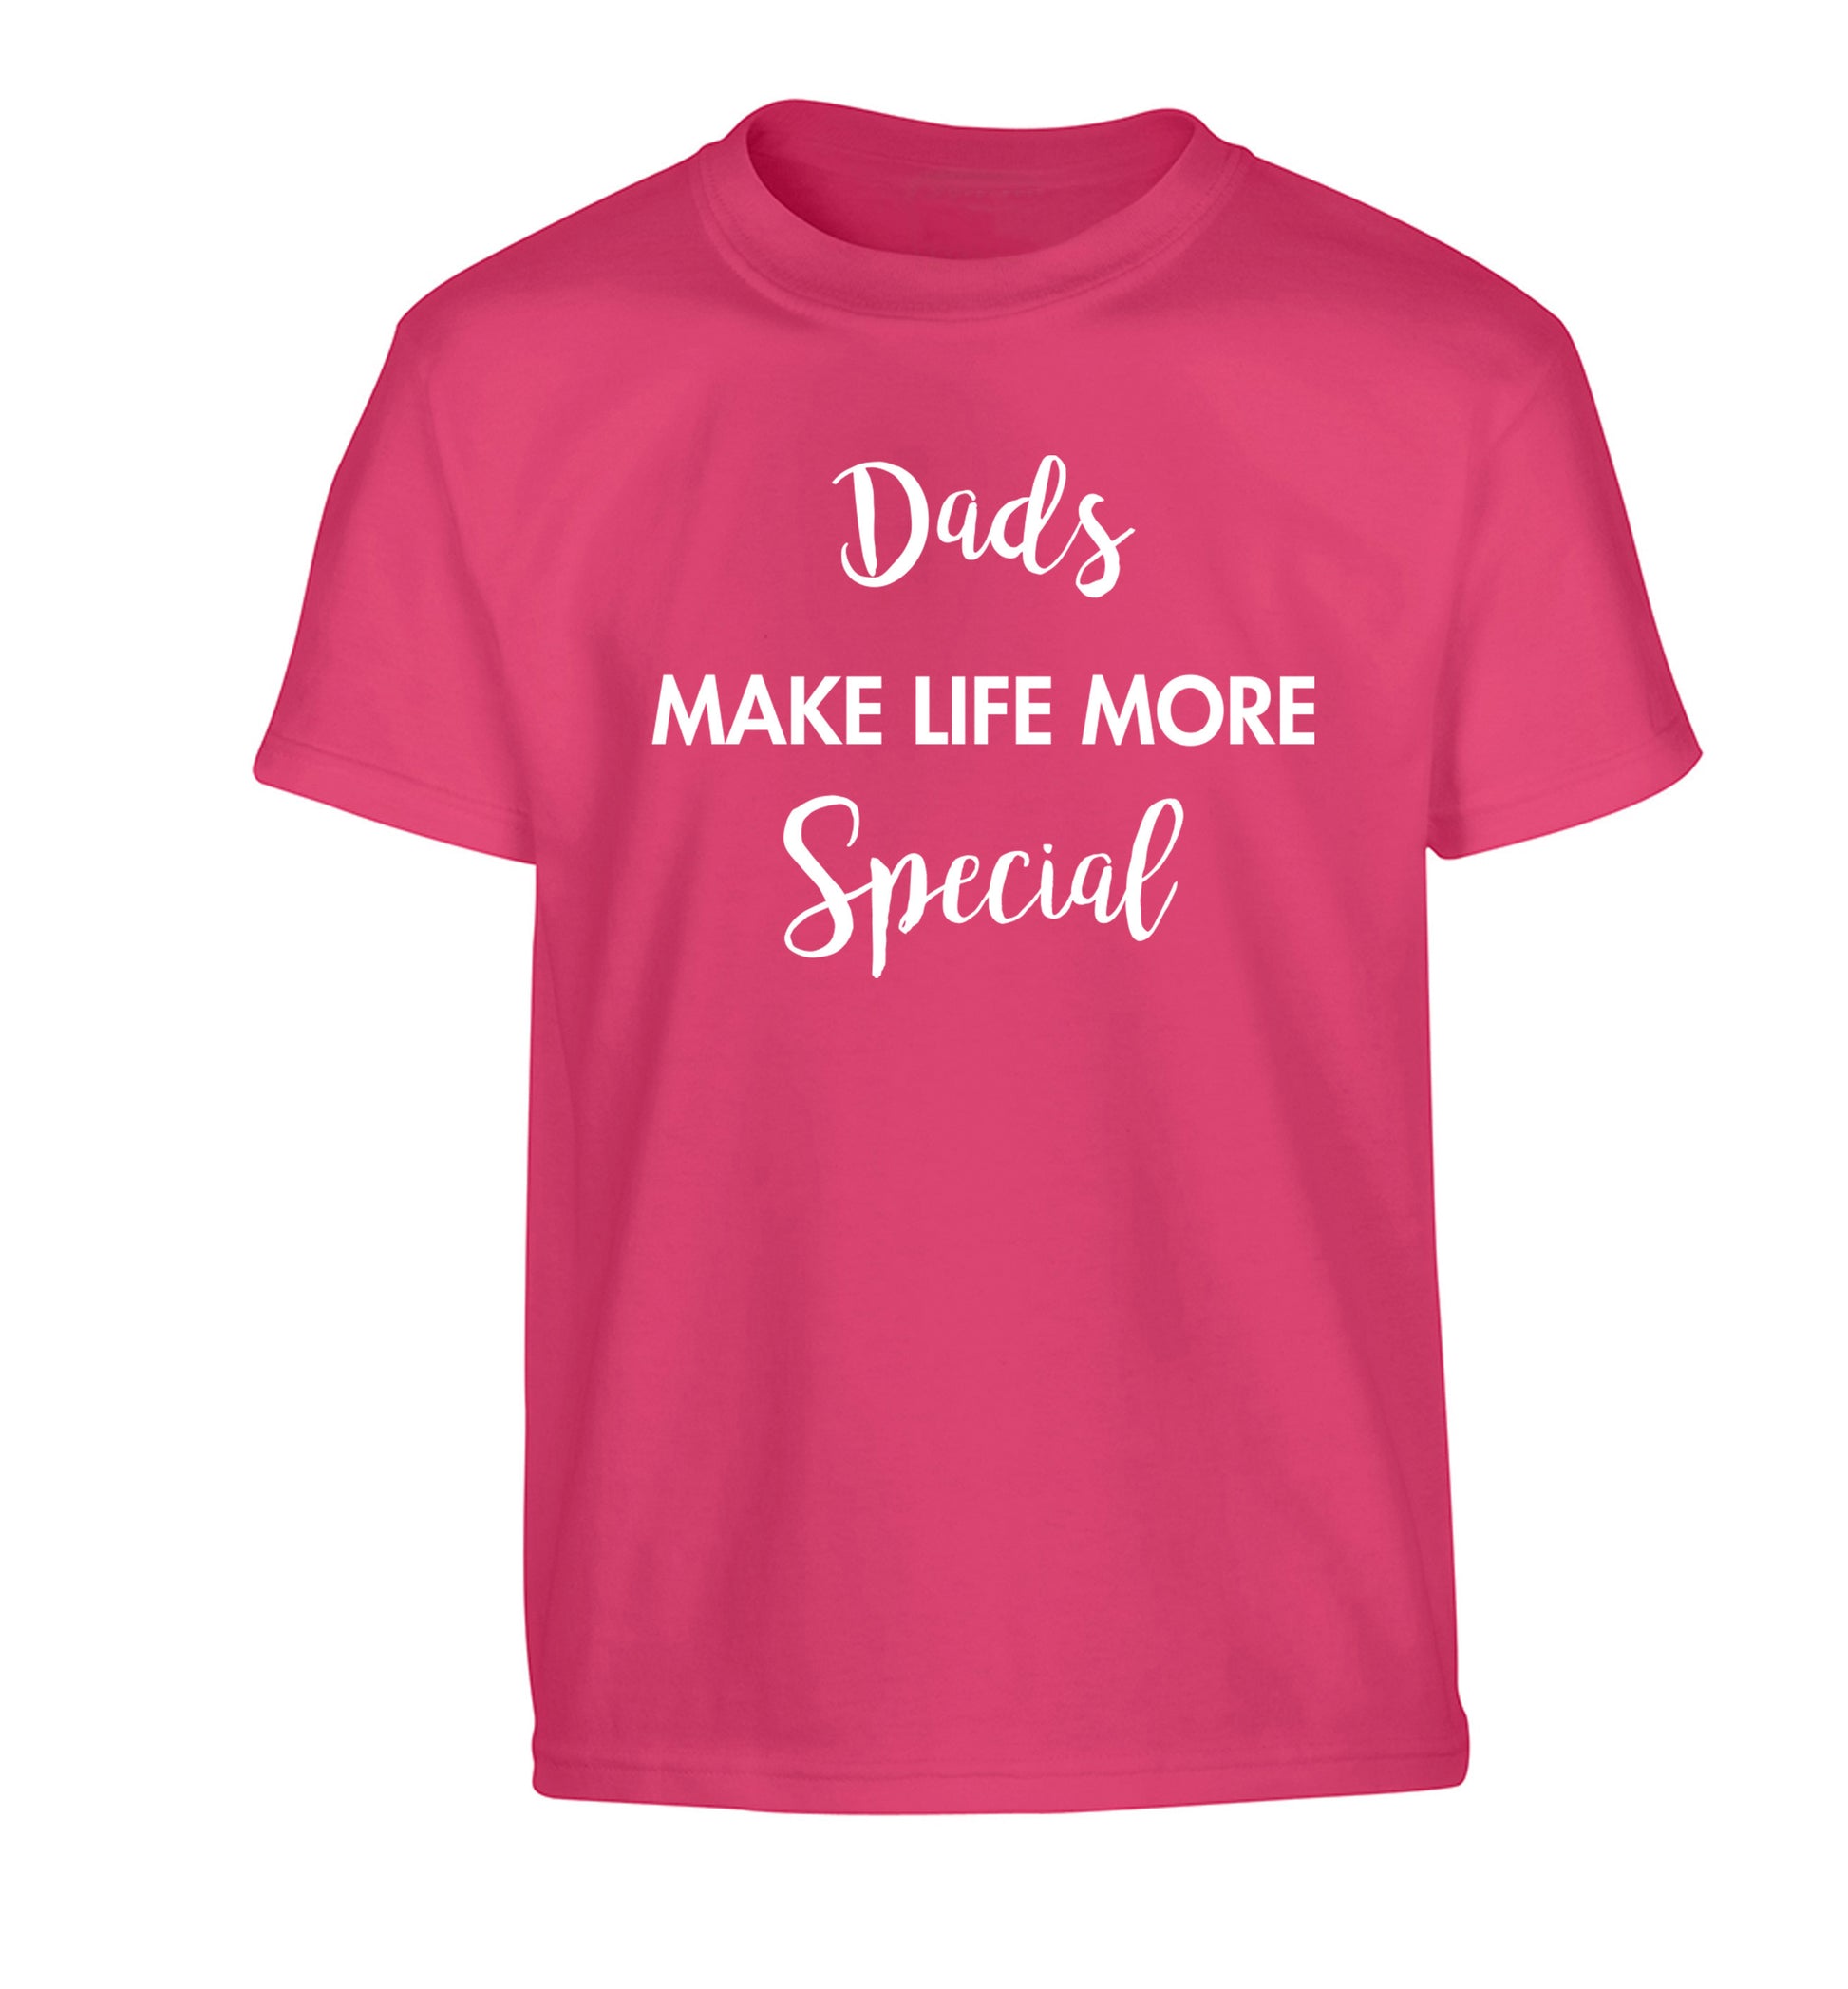 Dads make life more special Children's pink Tshirt 12-14 Years